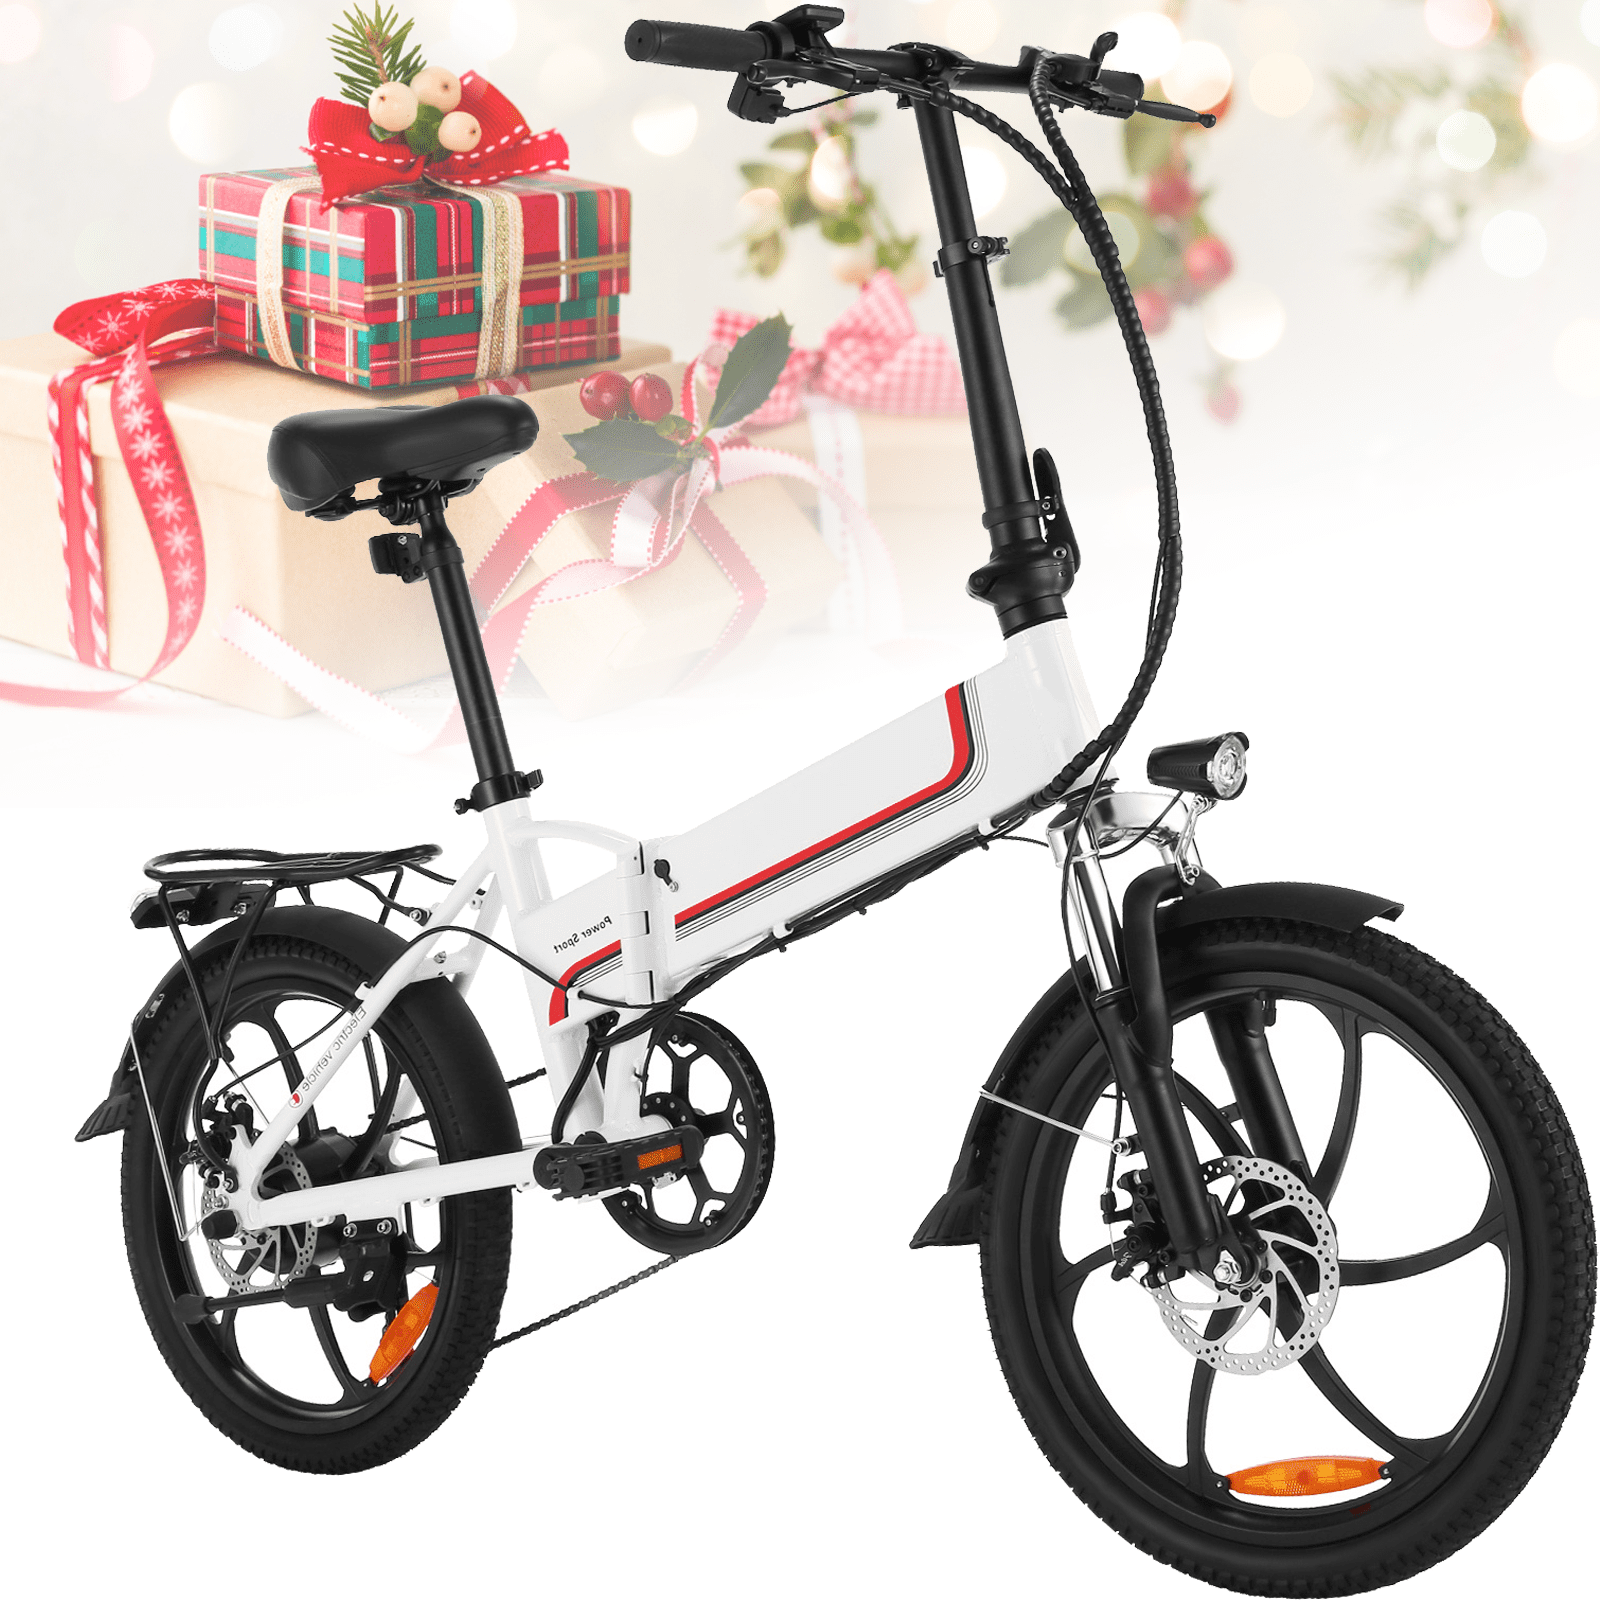 Folding Electric Bike, Electric Commuter Bicycle E-Bike with 48V 10.4AH Removable Battery, 350W Motor and Professional Rear 7 Speed Gear, White - Walmart.com